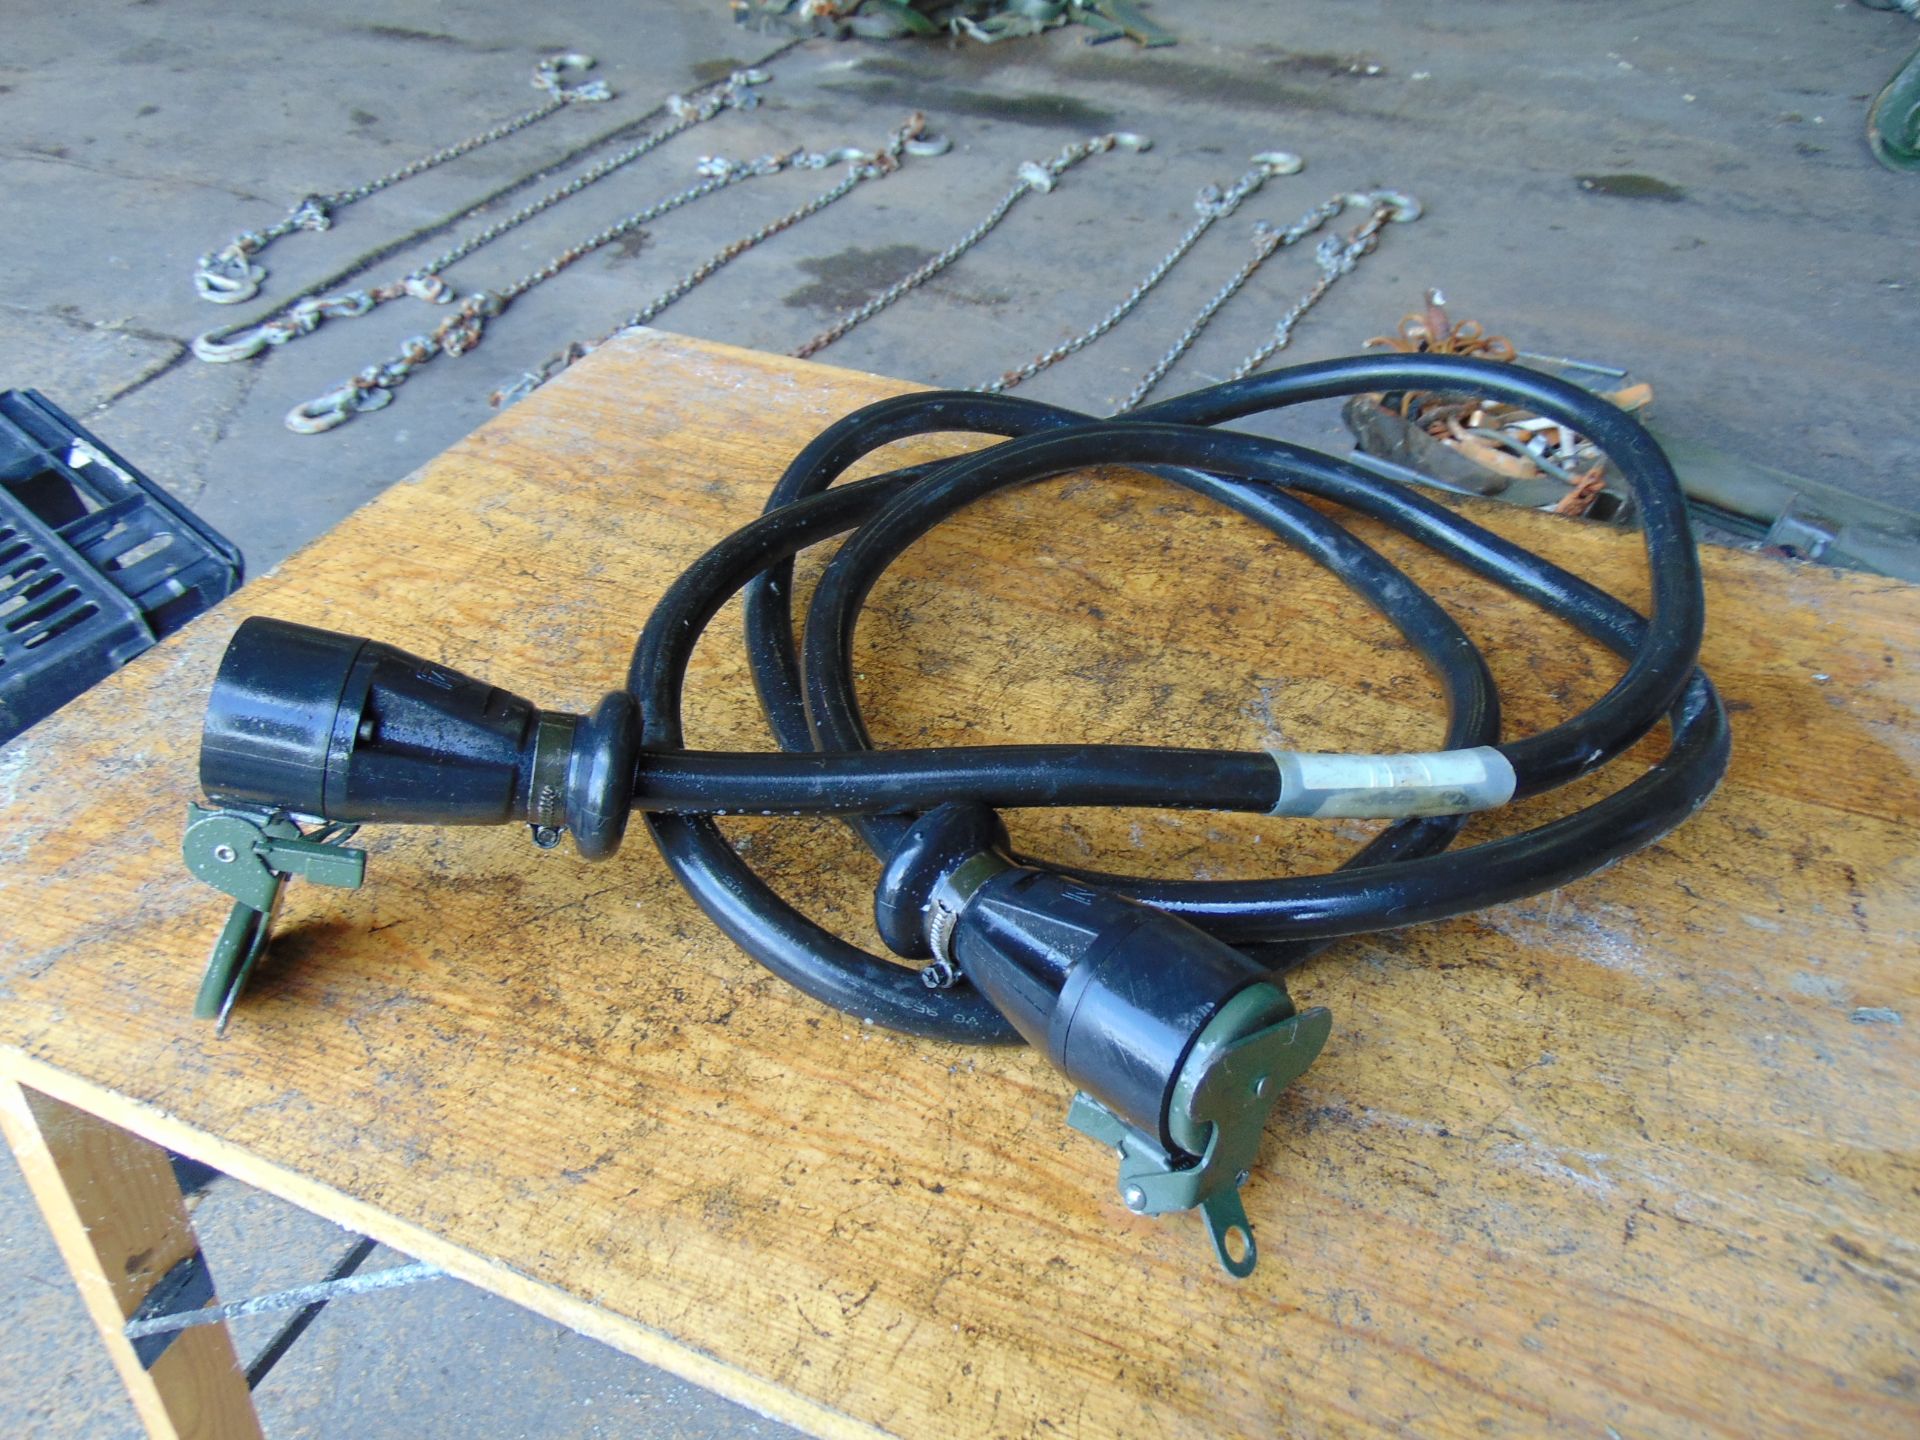 1 x Vehicle Power Connector Cable - Image 4 of 6